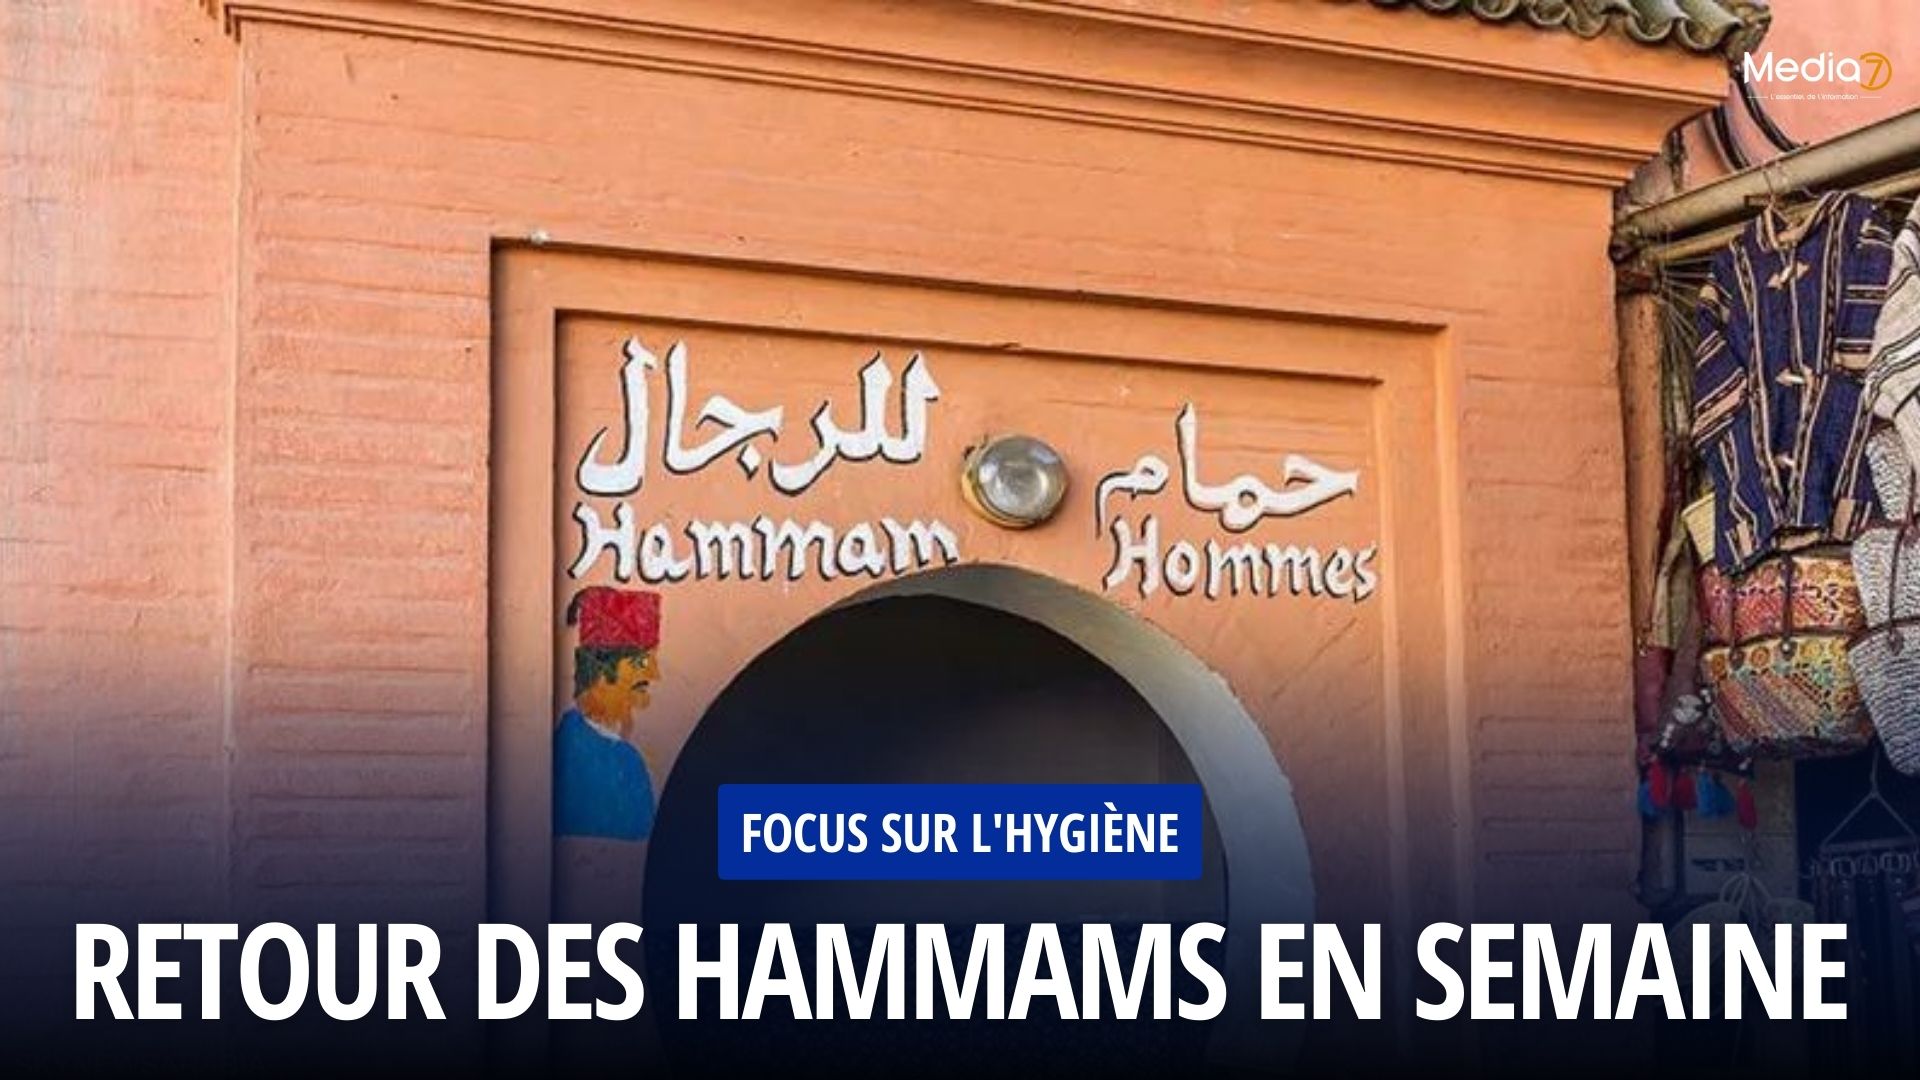 Marrakech hammams authorized to open every day with strict conditions